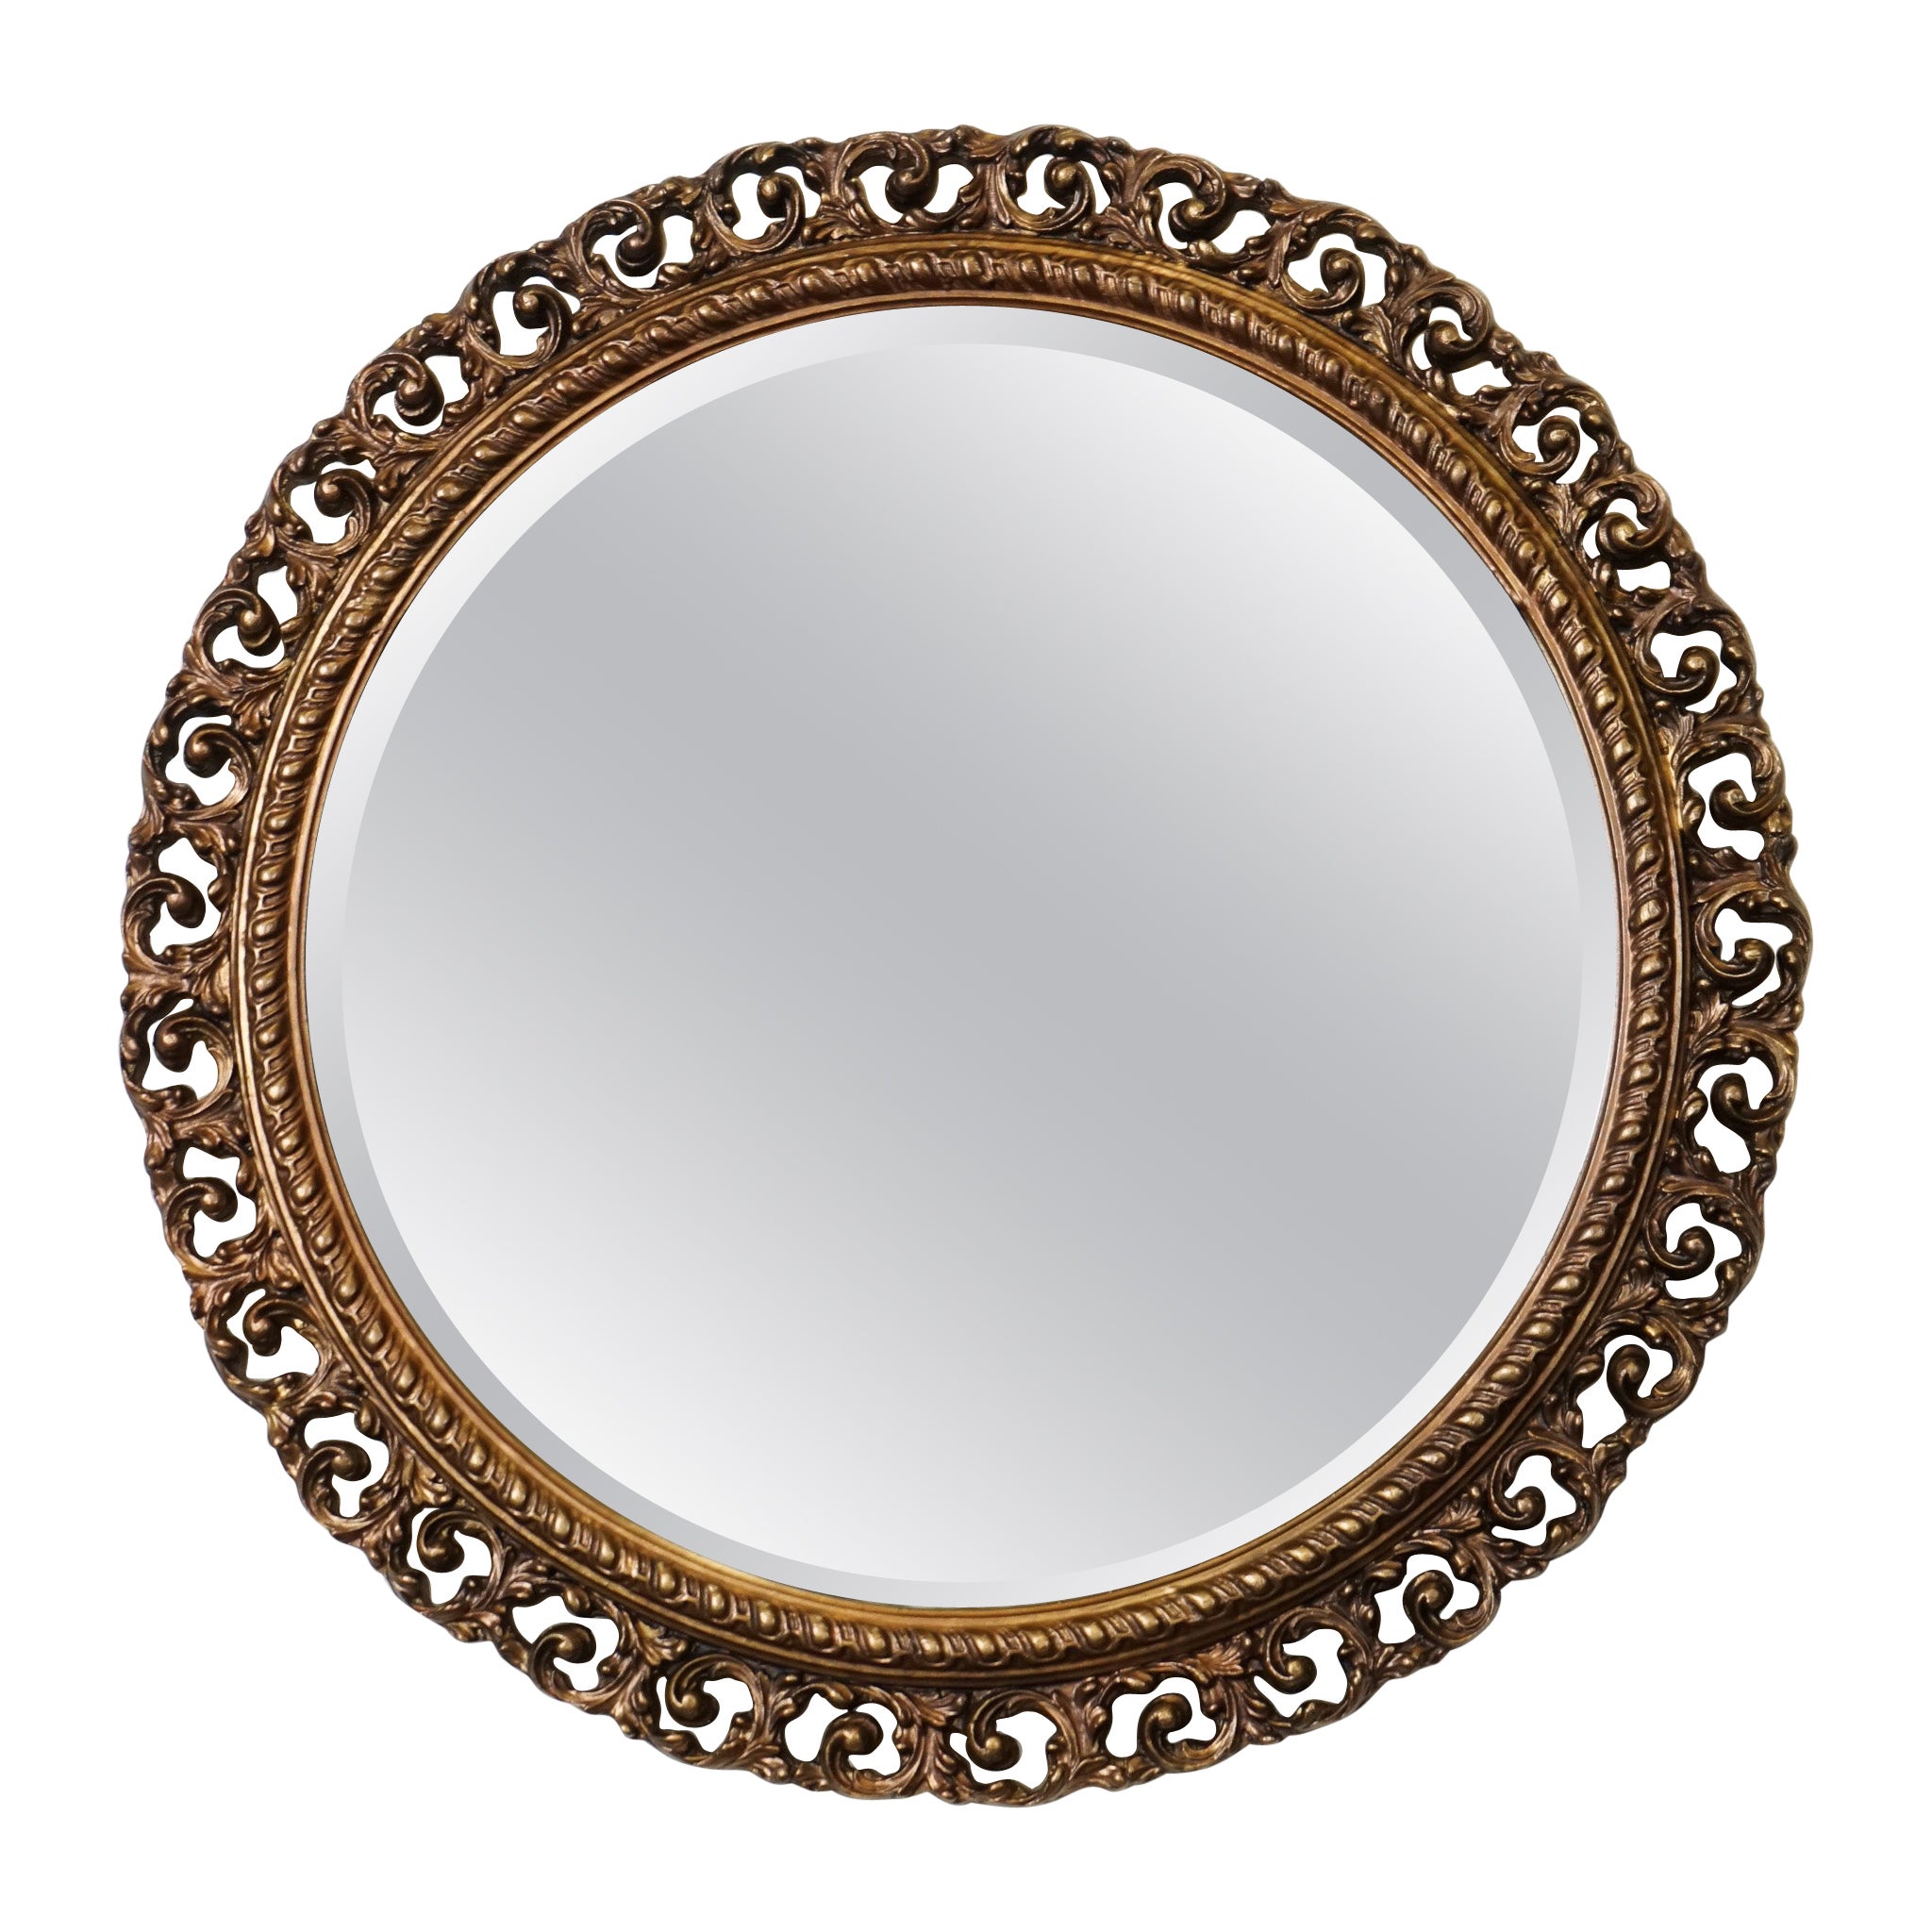 VINTAGE HAND CARVED BRONZE CIRCULAR BEVELLED WALL MIRROR j1 For Sale